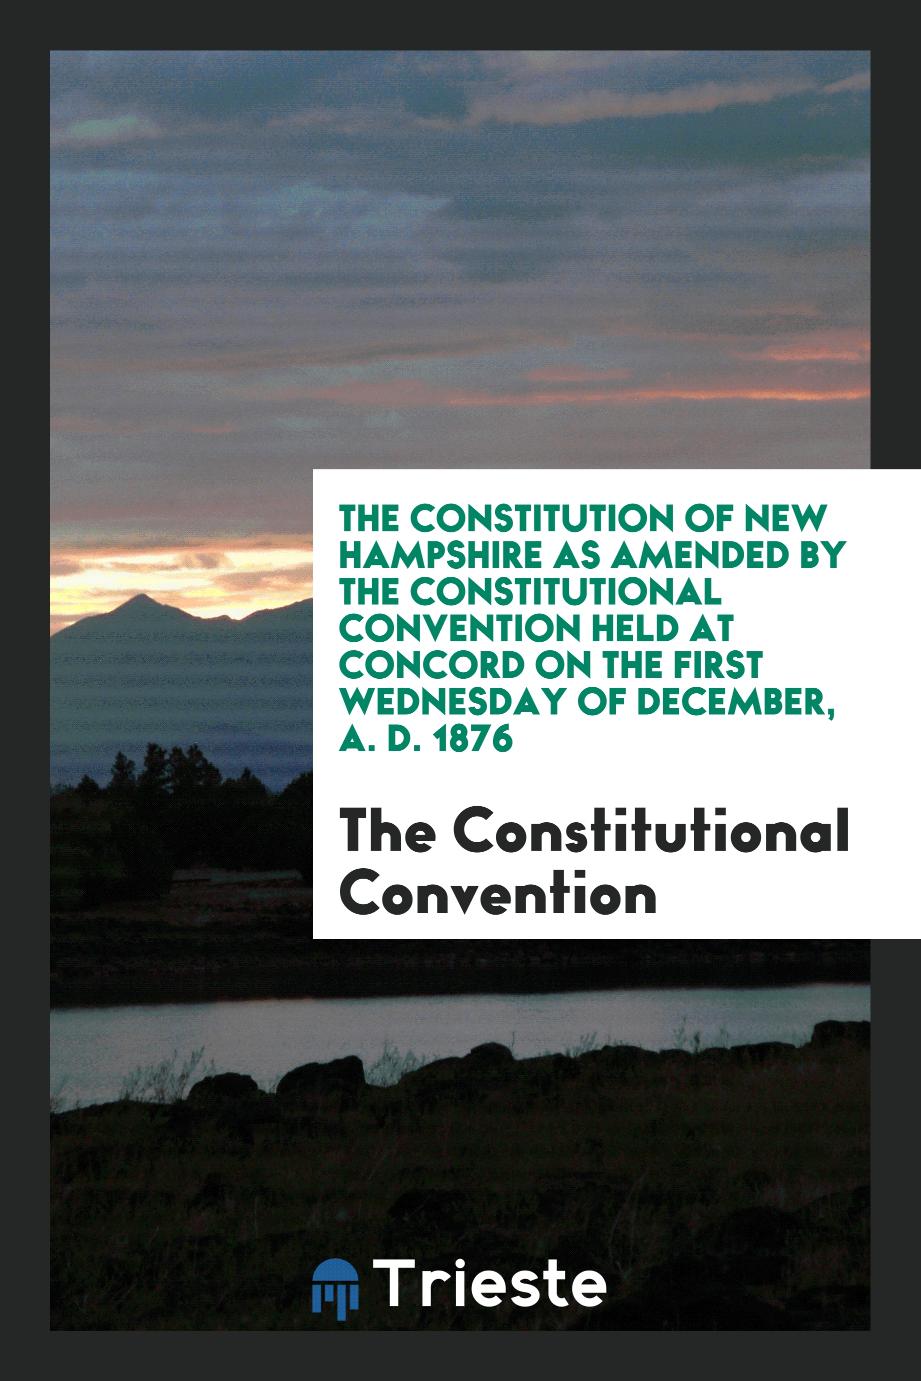 The constitution of New Hampshire as amended by the Constitutional convention held at Concord on the first Wednesday of December, A. D. 1876